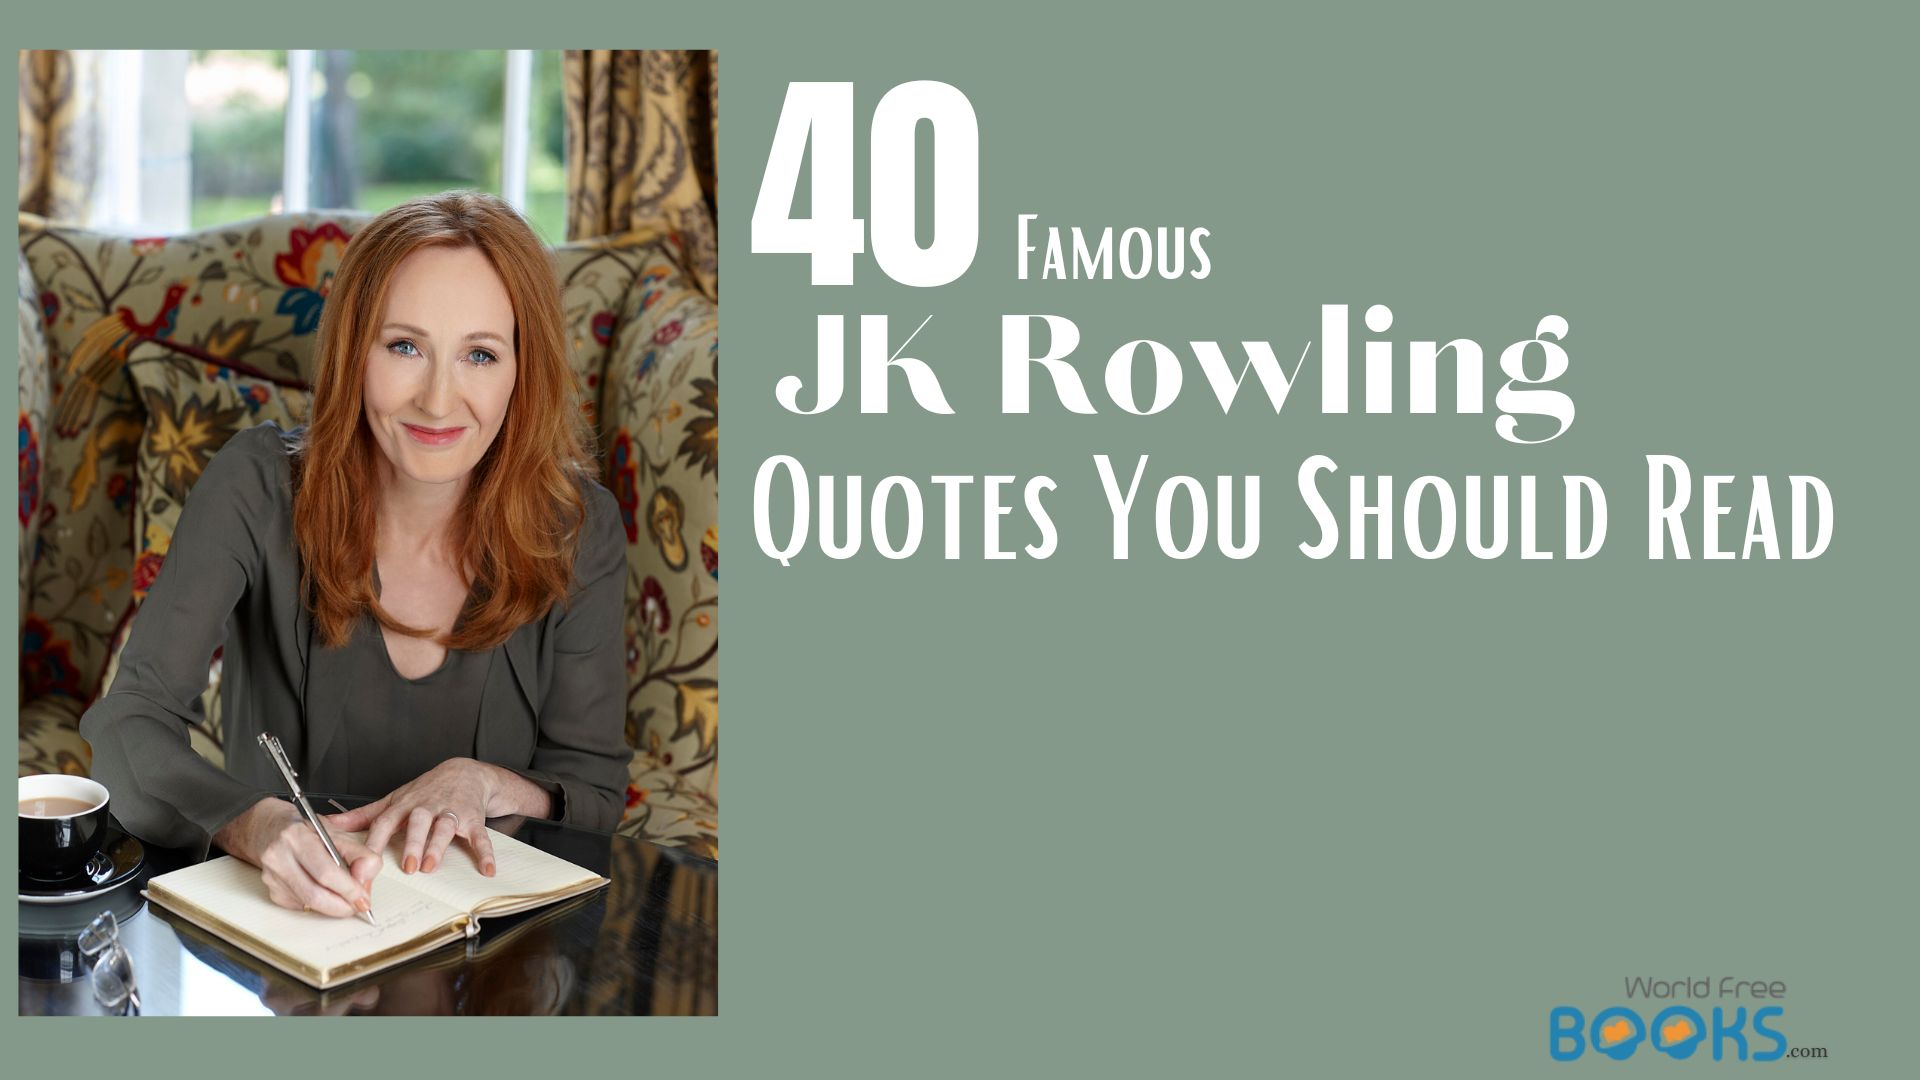 Famous JK Rowling Quotes You Should Read